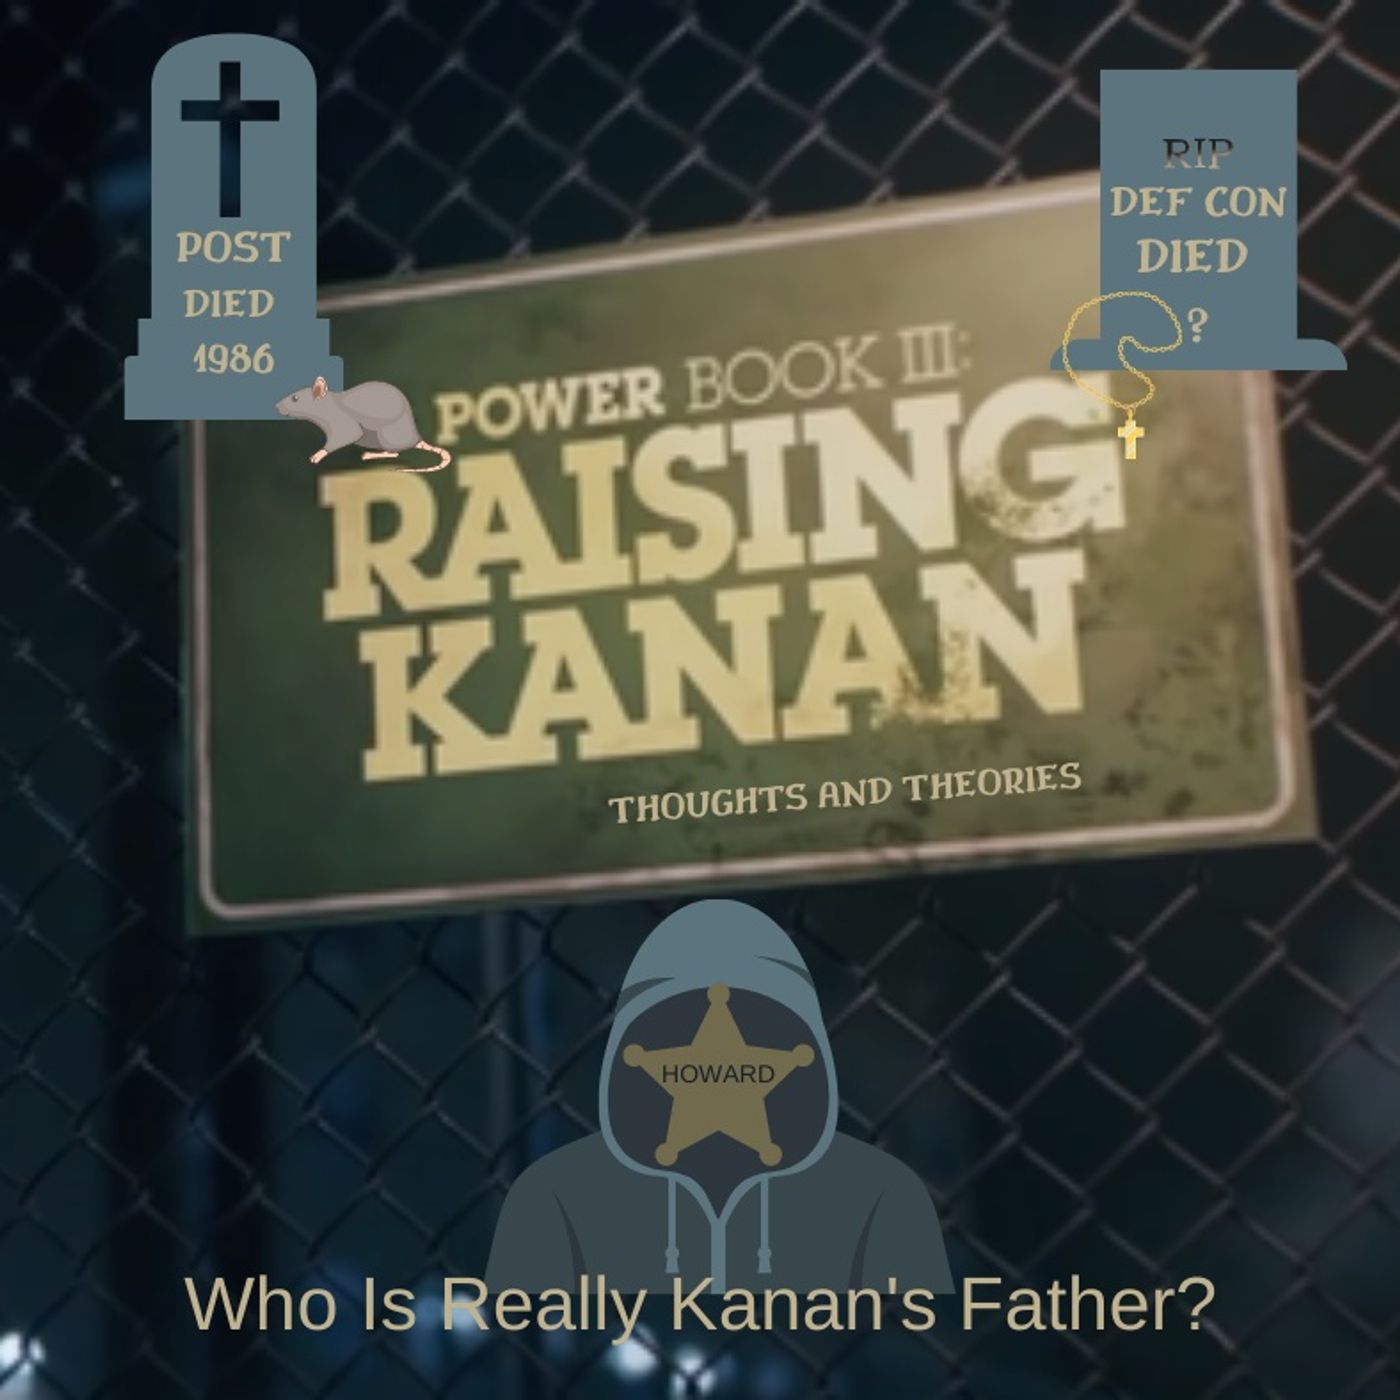 Power Book lll Raising Kanan “Back In The Day Review”